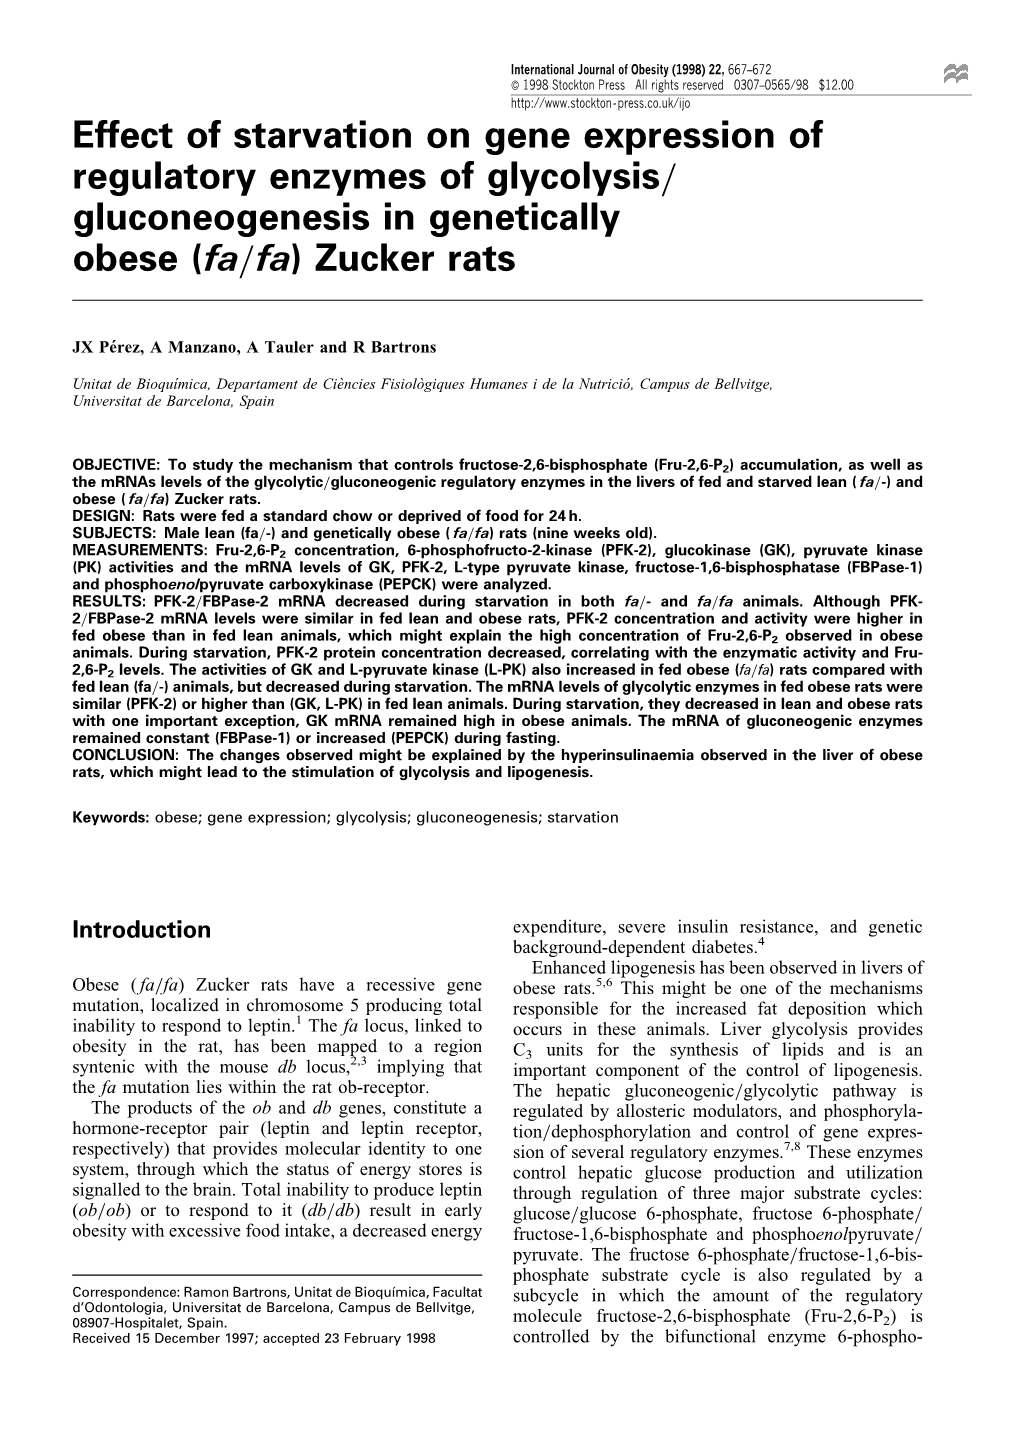 Effect of Starvation on Gene Expression of Regulatory Enzymes of Glycolysis= Gluconeogenesis in Genetically Obese (Fa=Fa) Zucker Rats